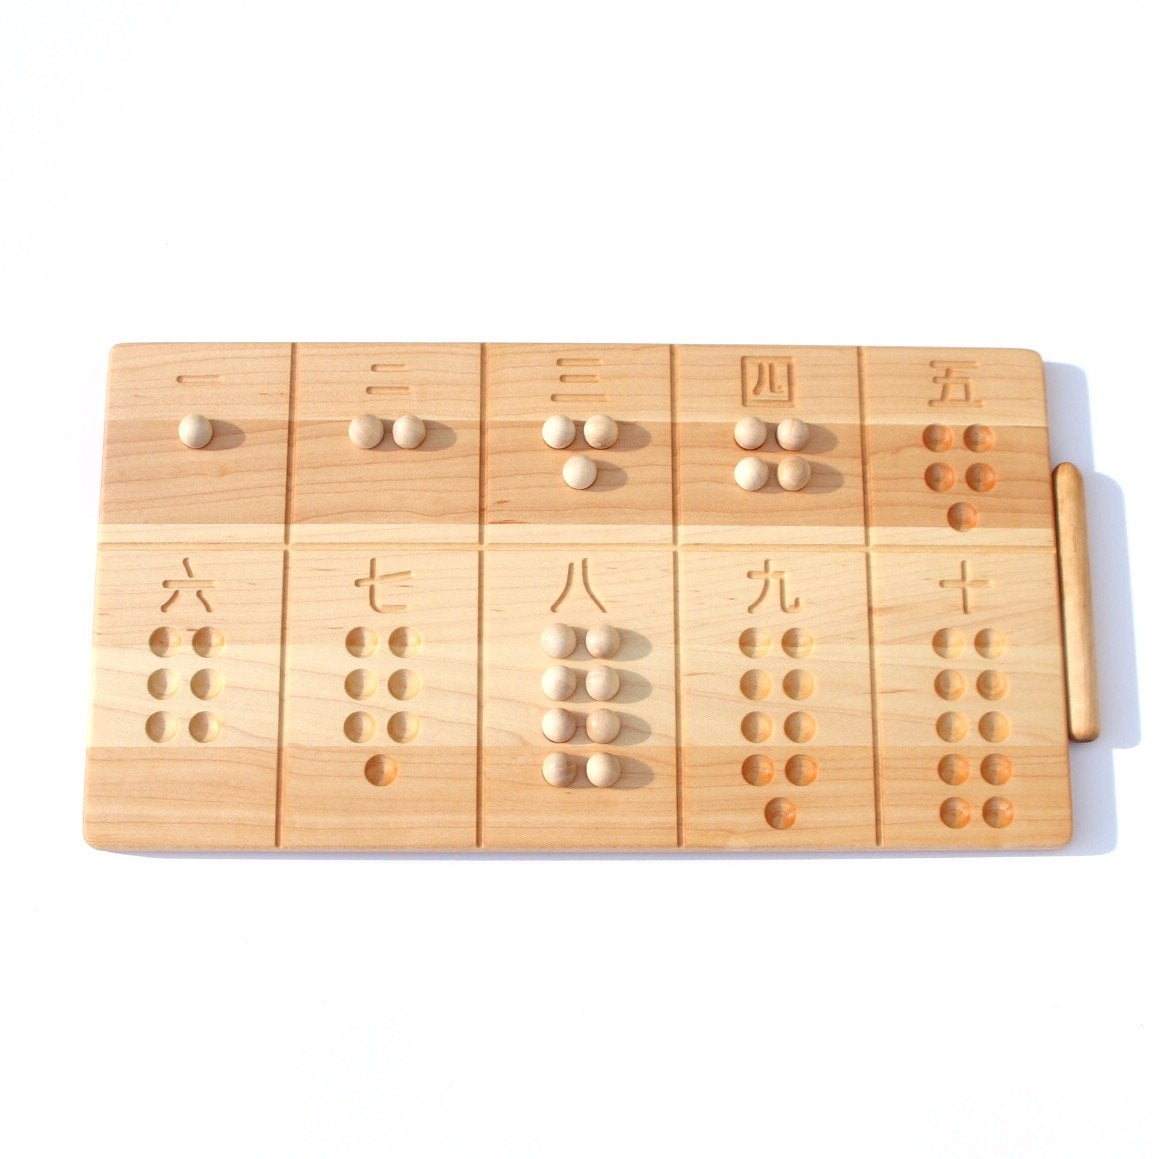 Chinese 1-10 Board